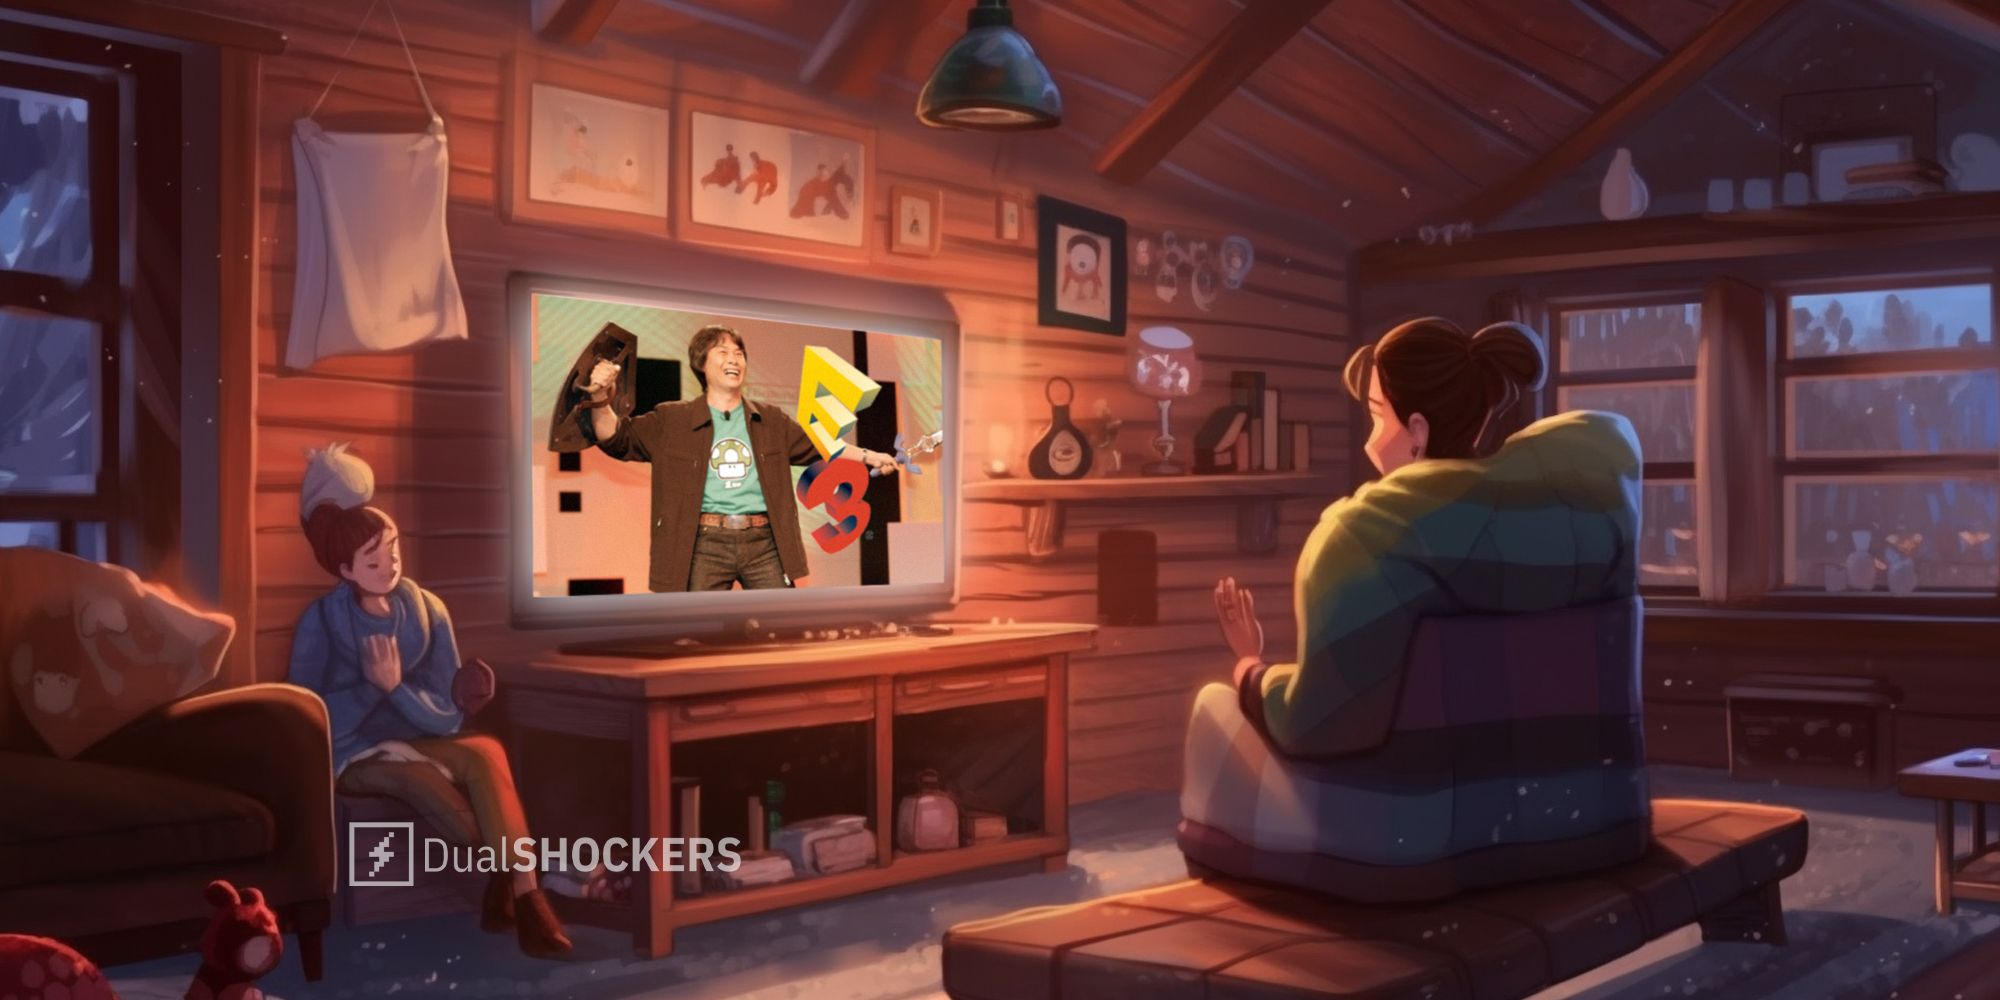 E3 with Zelda creator Shigeru Miyamoto announcing The Legend of Zelda Twilight Princess on the tv in a cozy cabin in winter